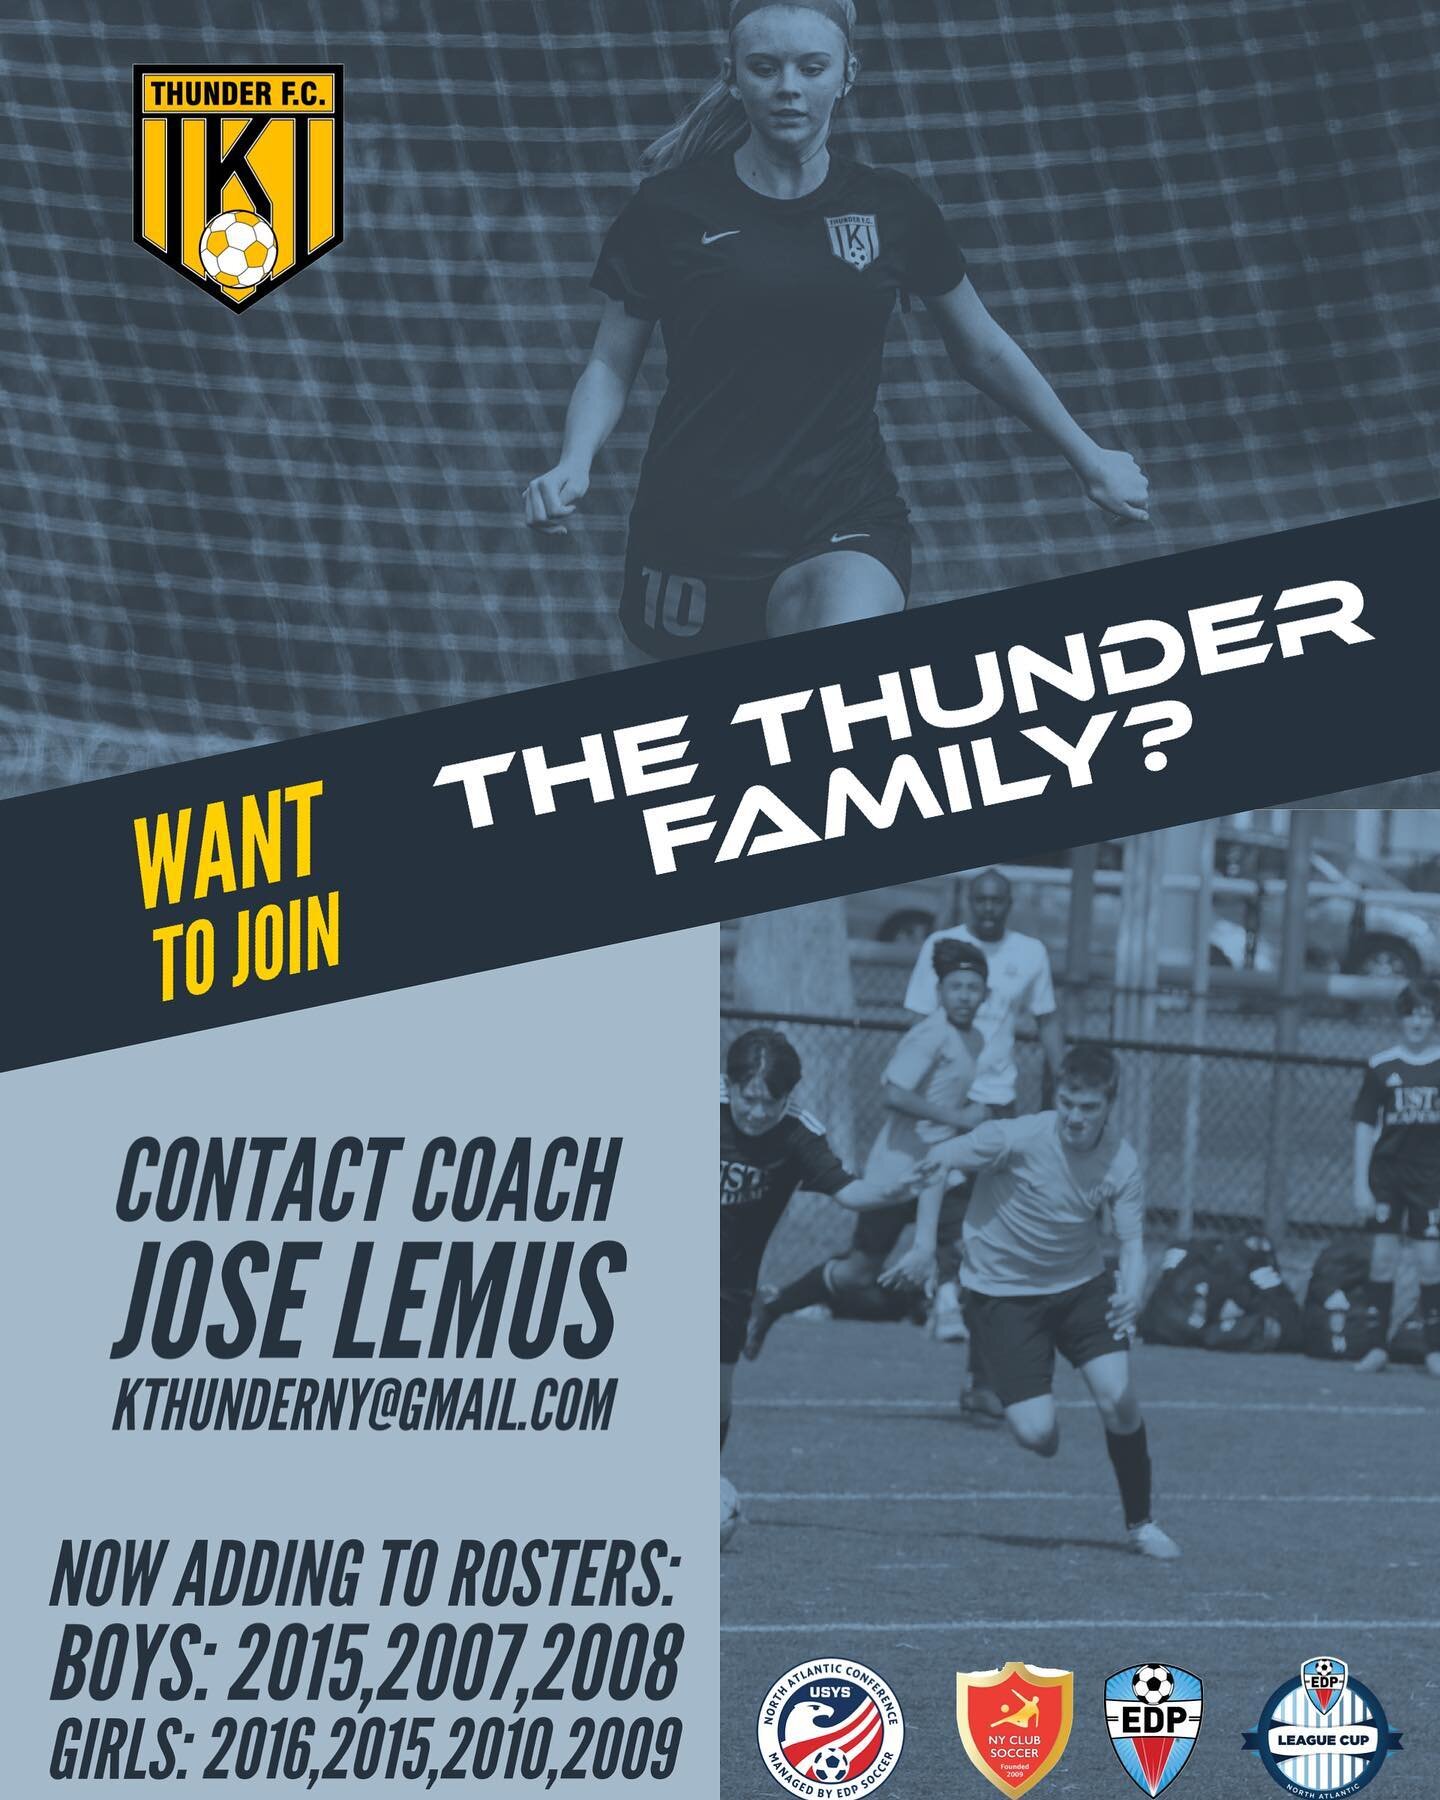 Interested in joining one of our teams? 

Please contact coach Jose Lemus at kthunderny@gmail.com for more information.